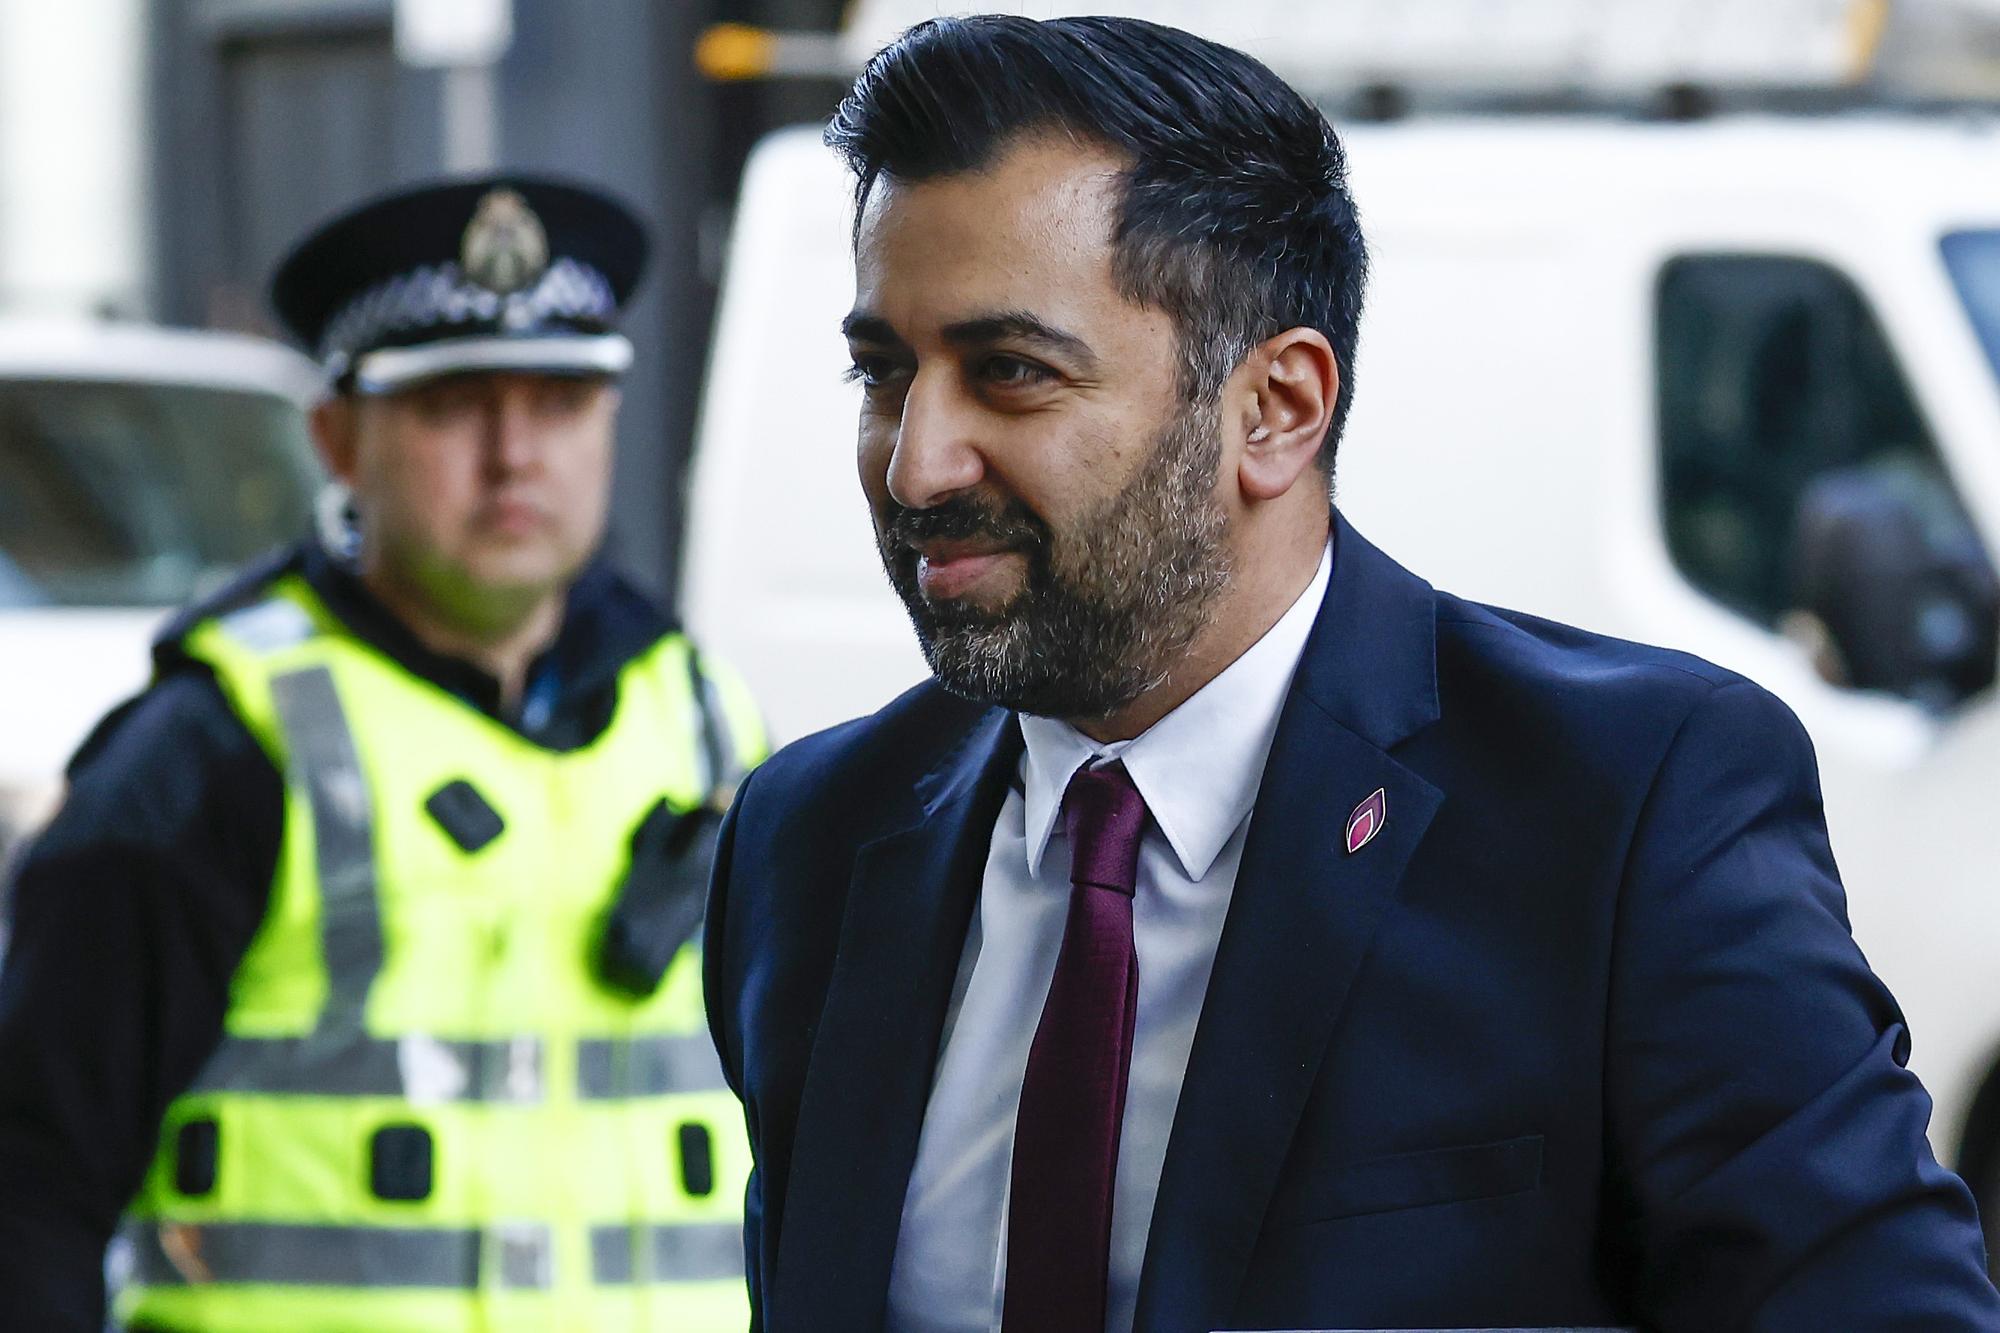 uk covid inquiry: humza yousaf apologises 'unreservedly' for scottish government's failure to hand over whatsapp messages